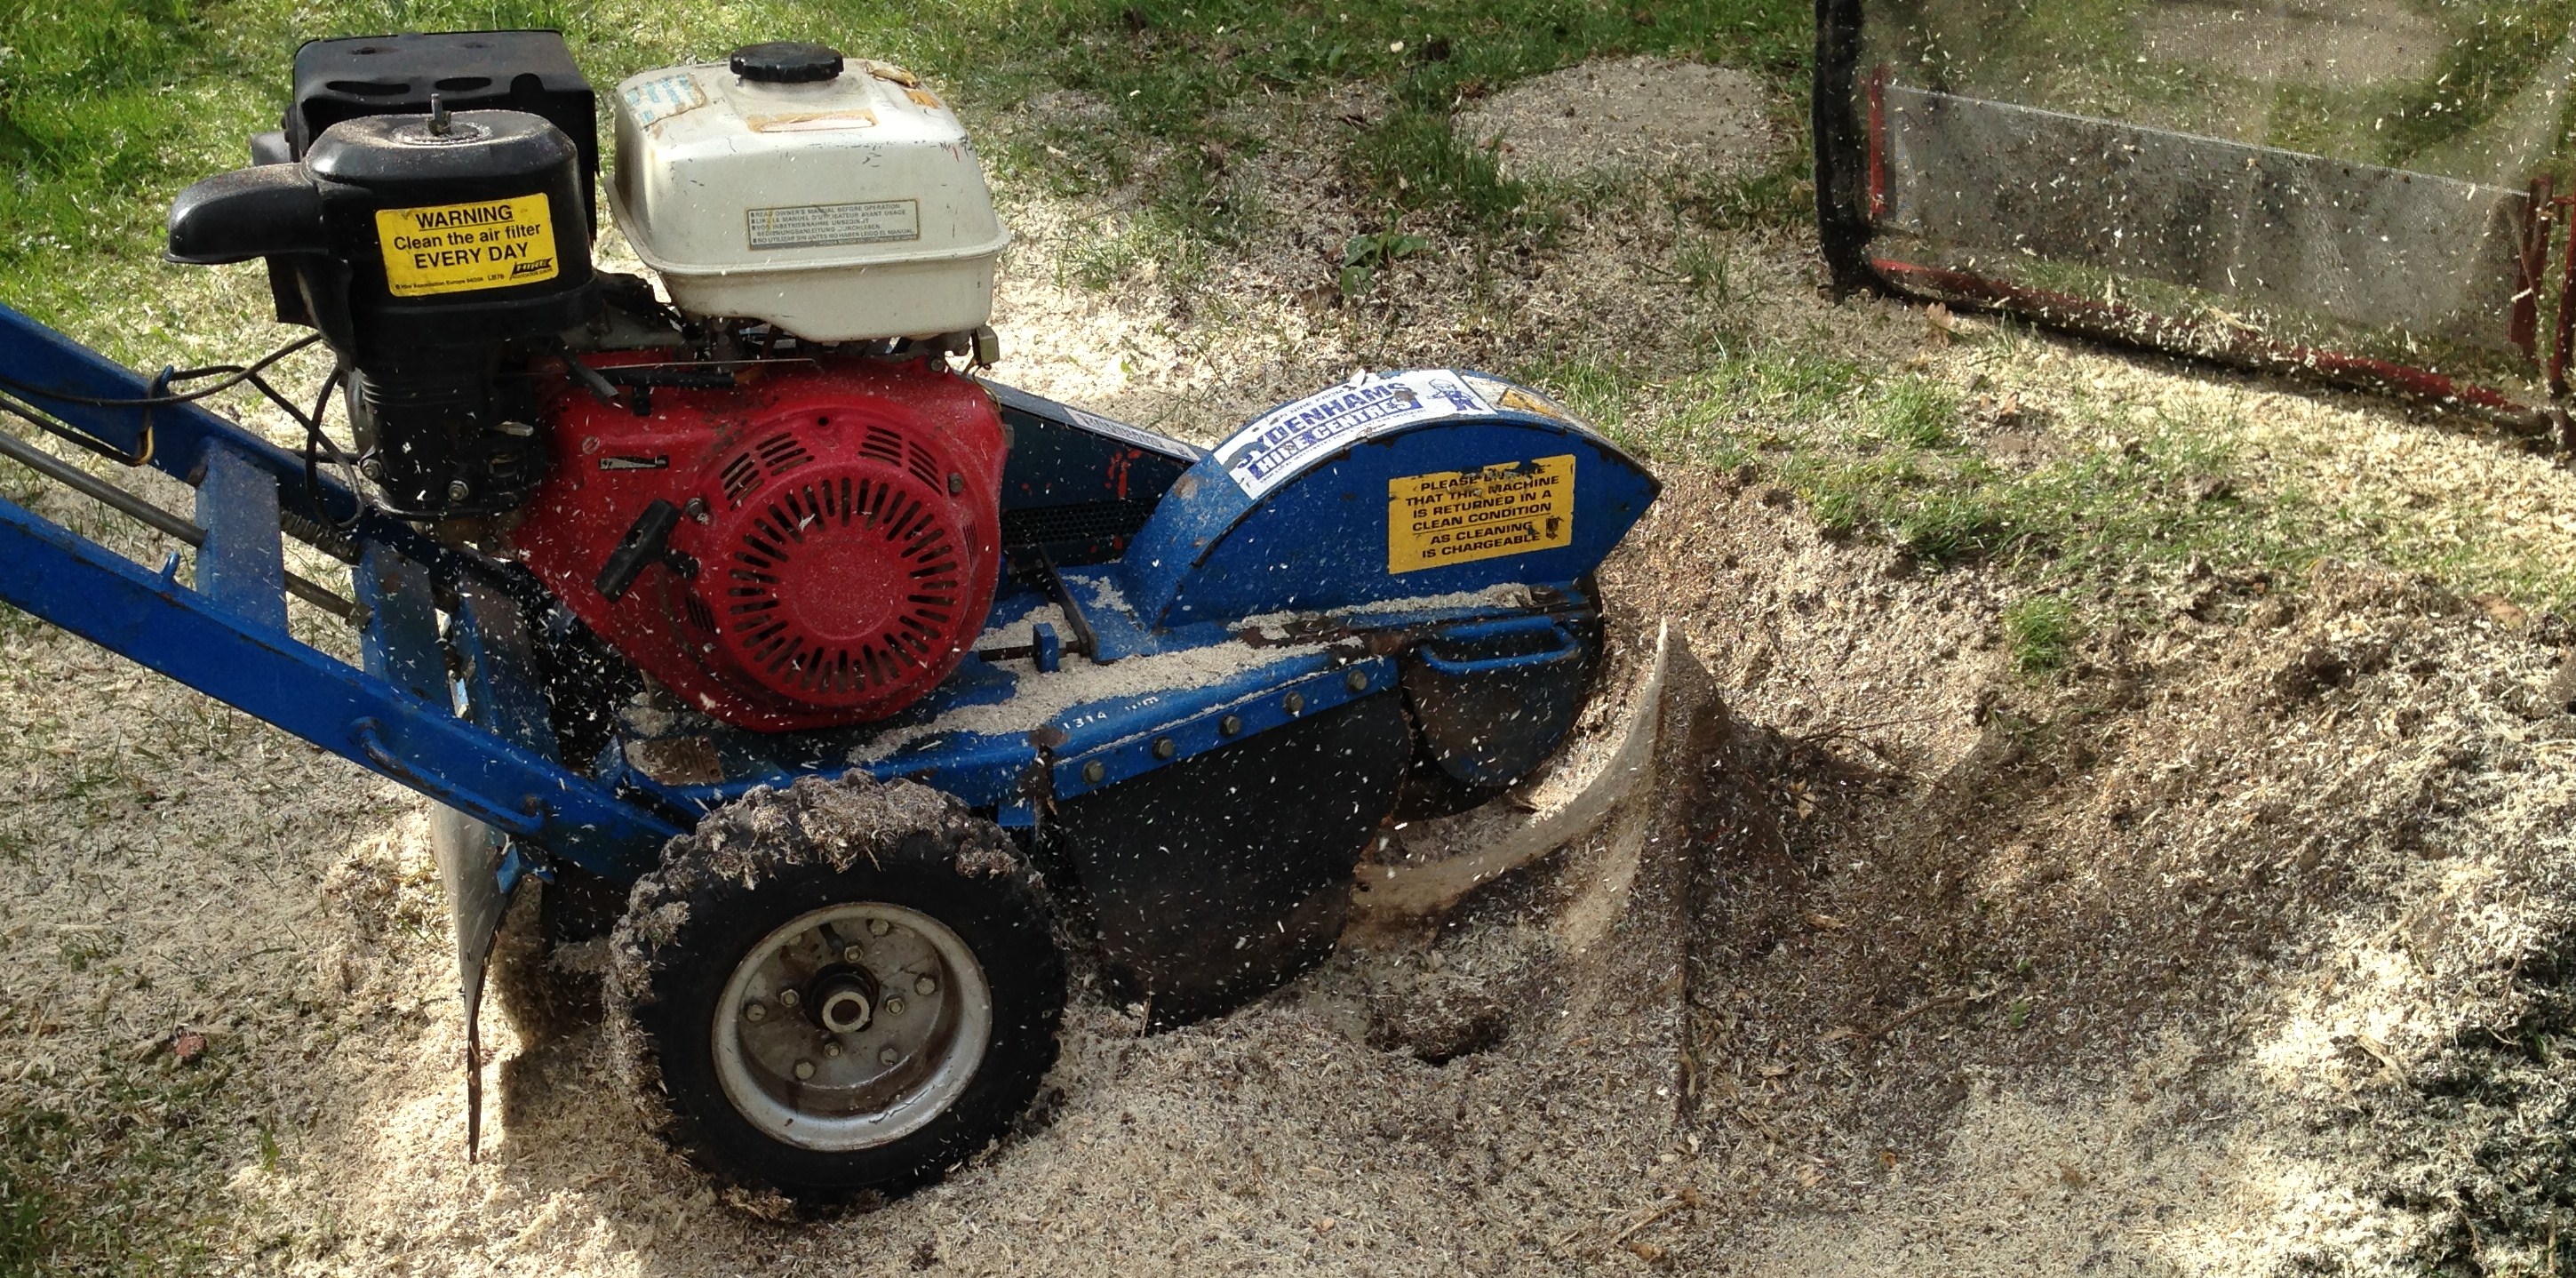 Stump Grinding in Weymouth, Portland, Dorchester - stump grinder removing a stump after tree was felled